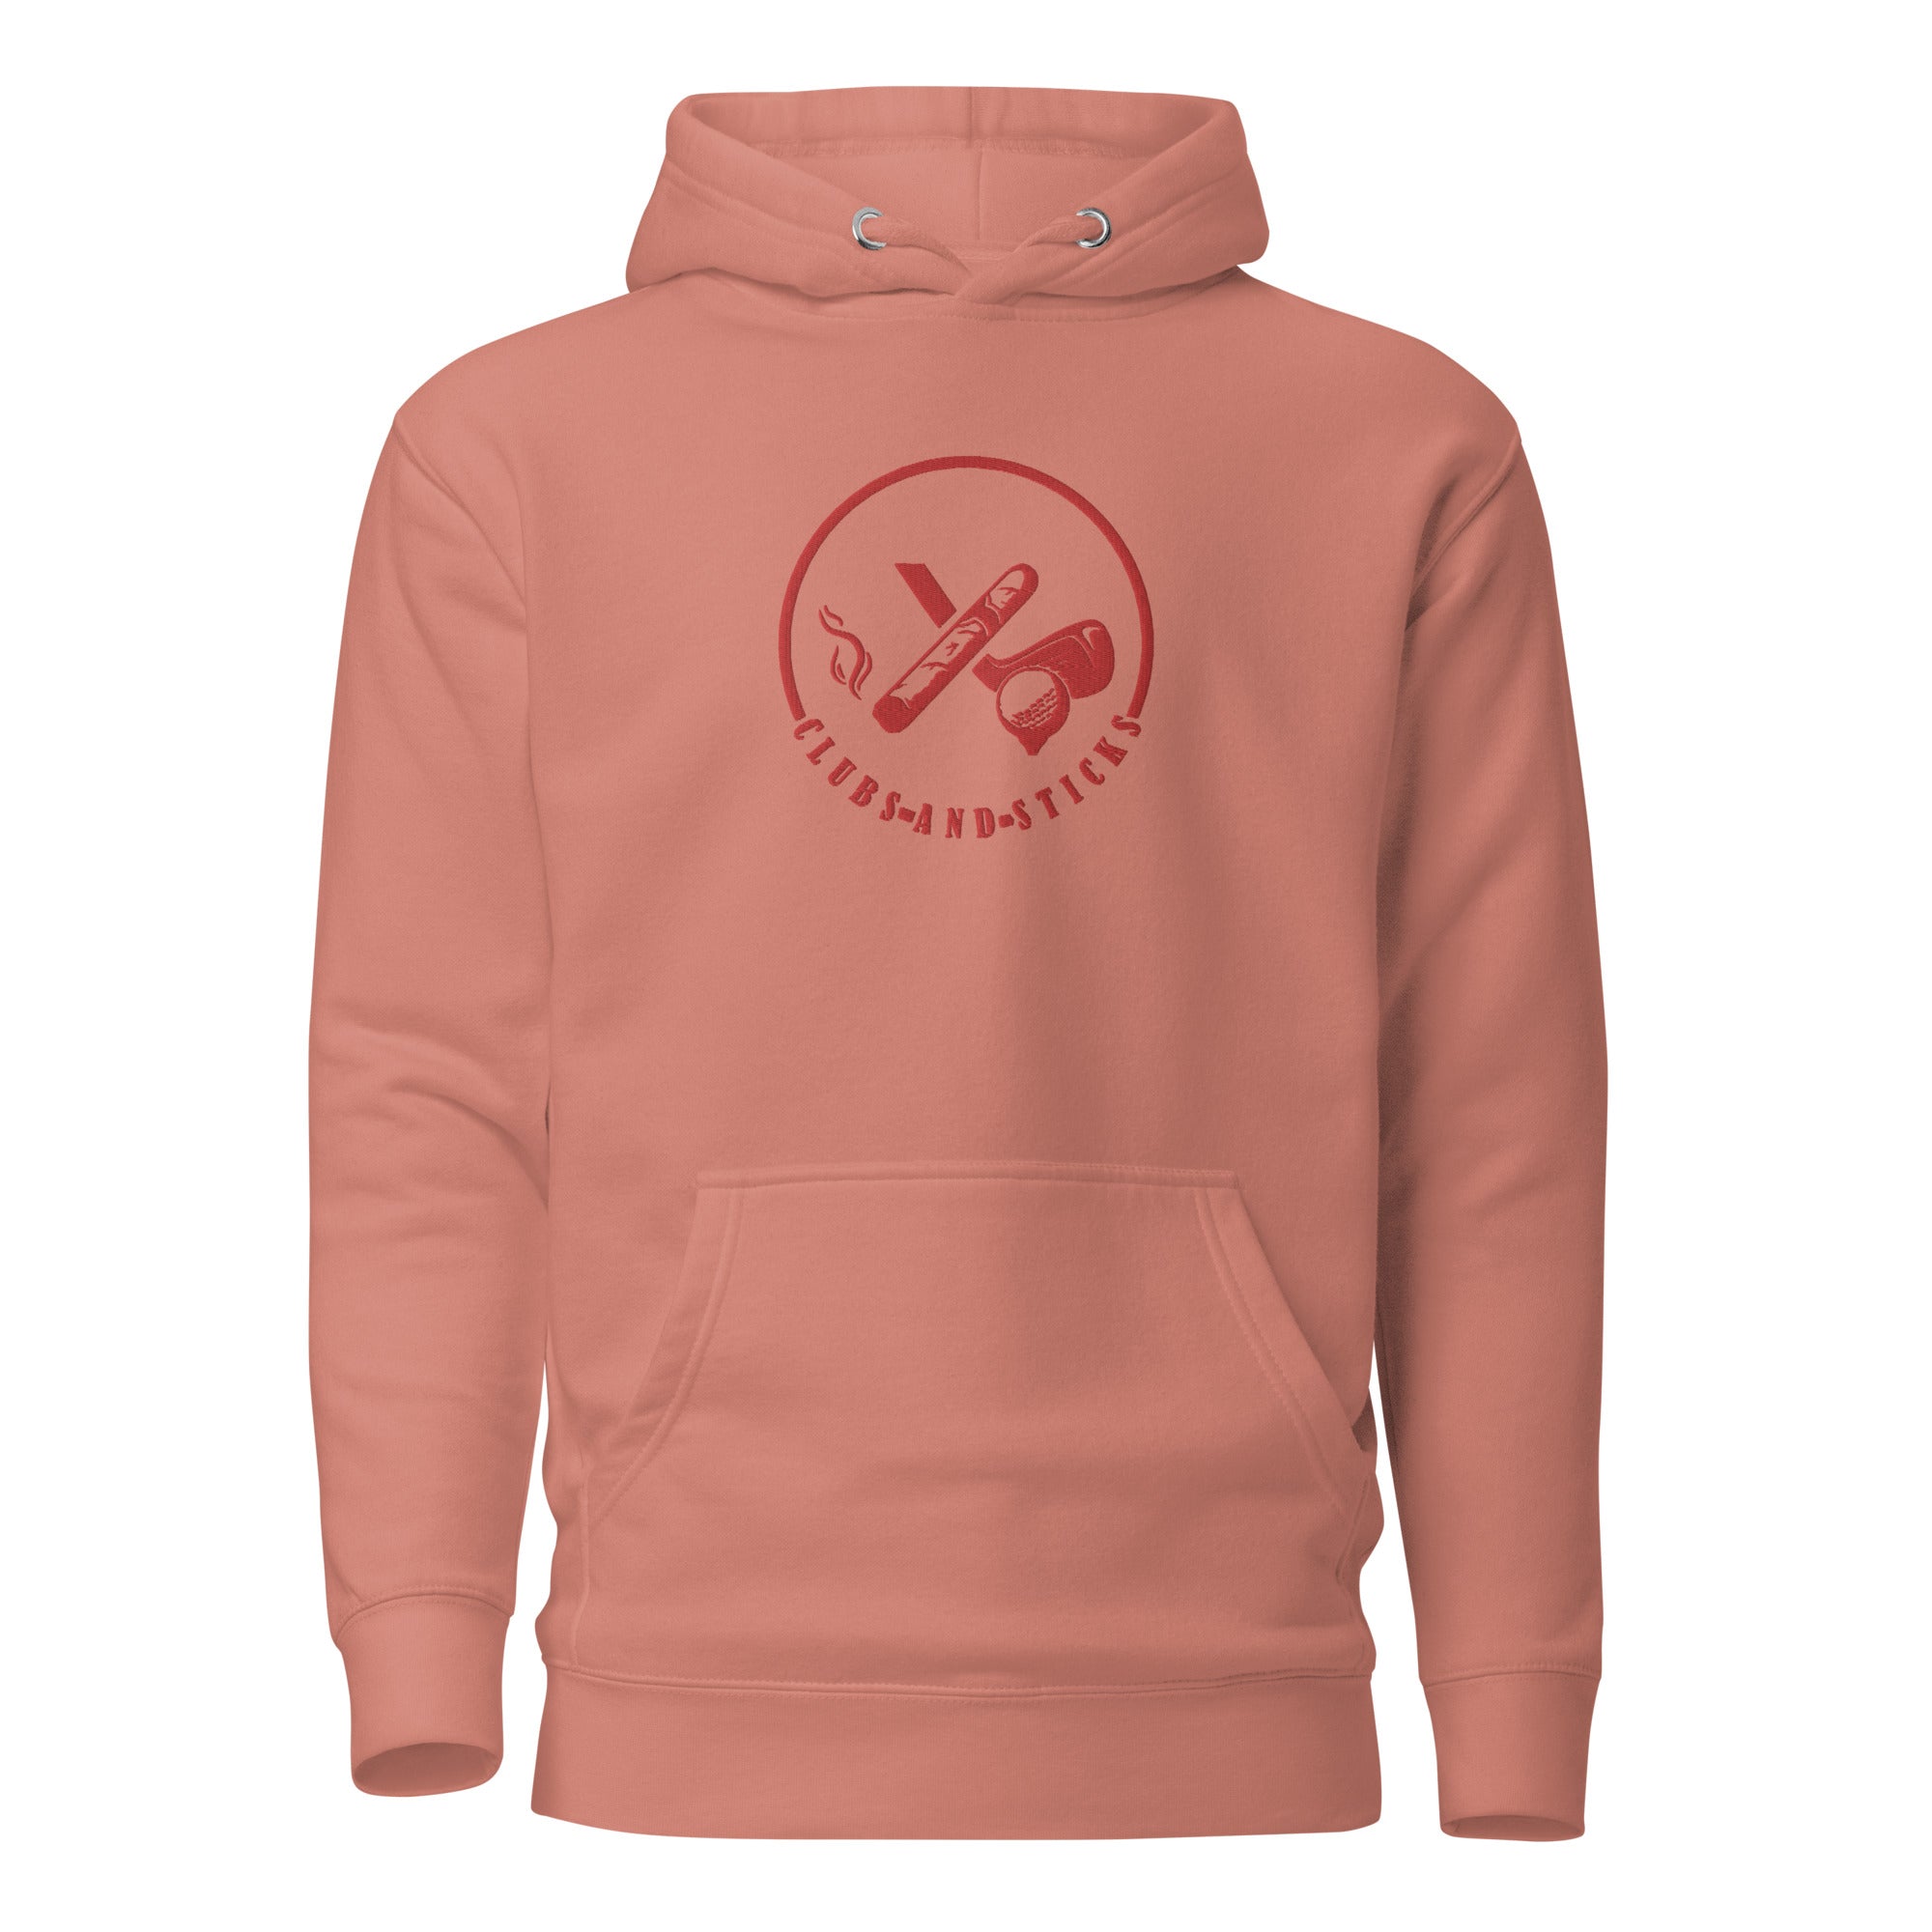 Clubs and Sticks Embroidered Red Logo Hoodie